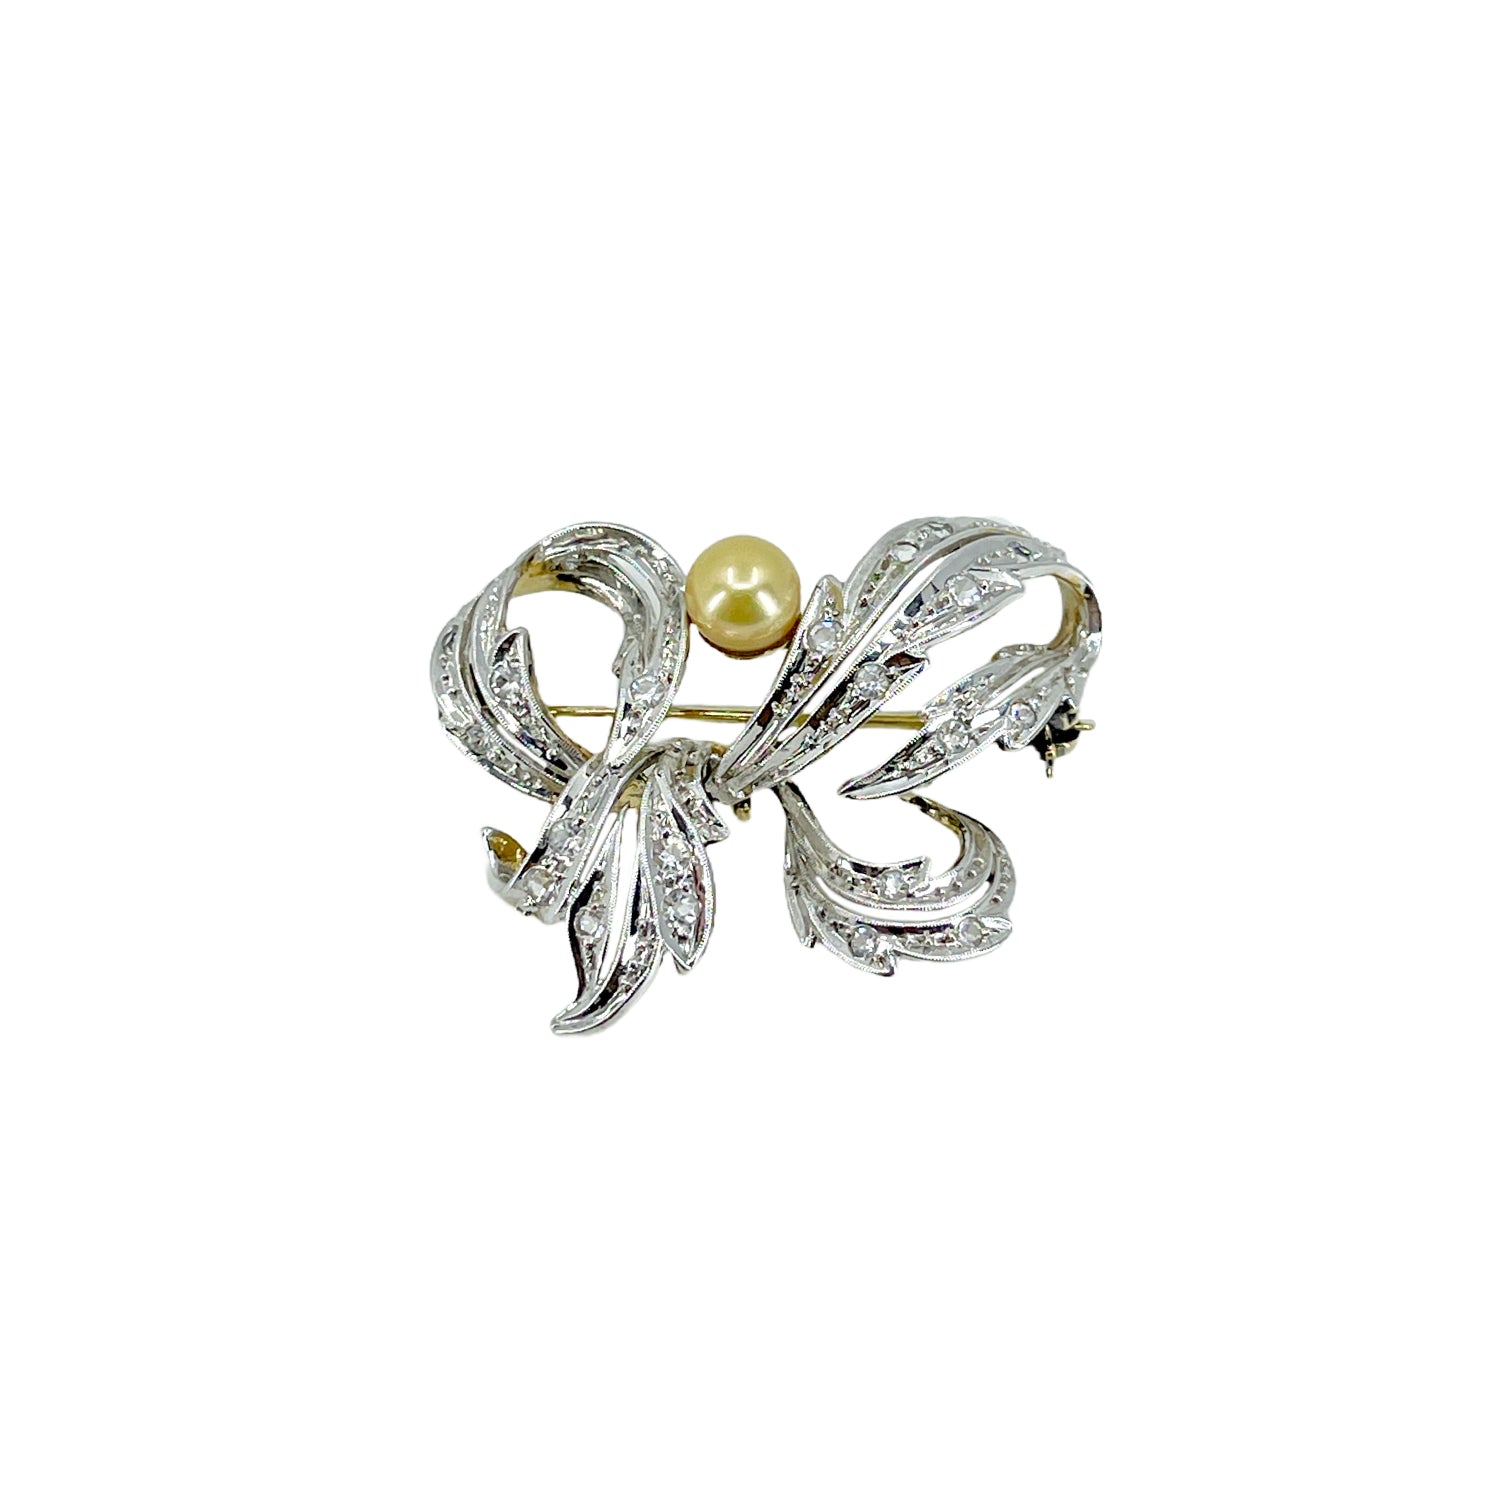 Victorian Two Tone Vintage Golden Japanese Cultured Saltwater Akoya Pearl Brooch- Sterling Silver Gold Plate